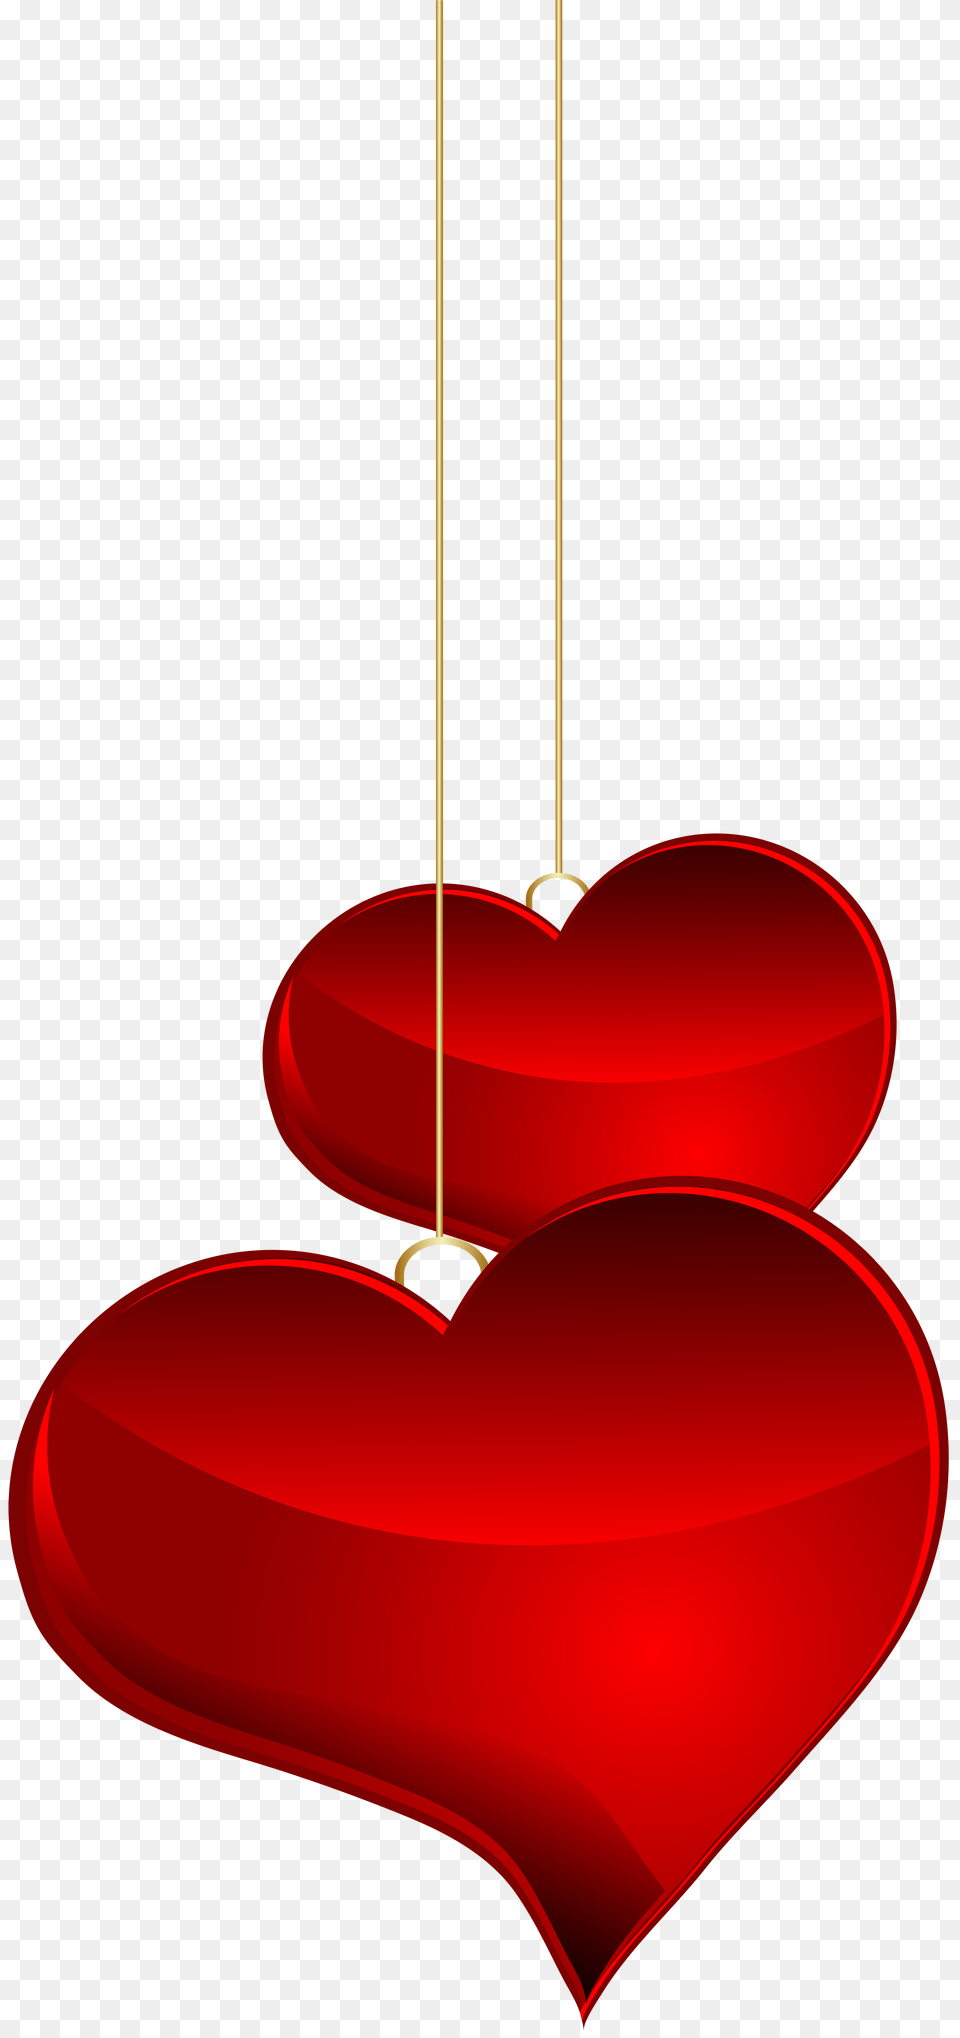 Hanging Hearts Transparent, Heart Png